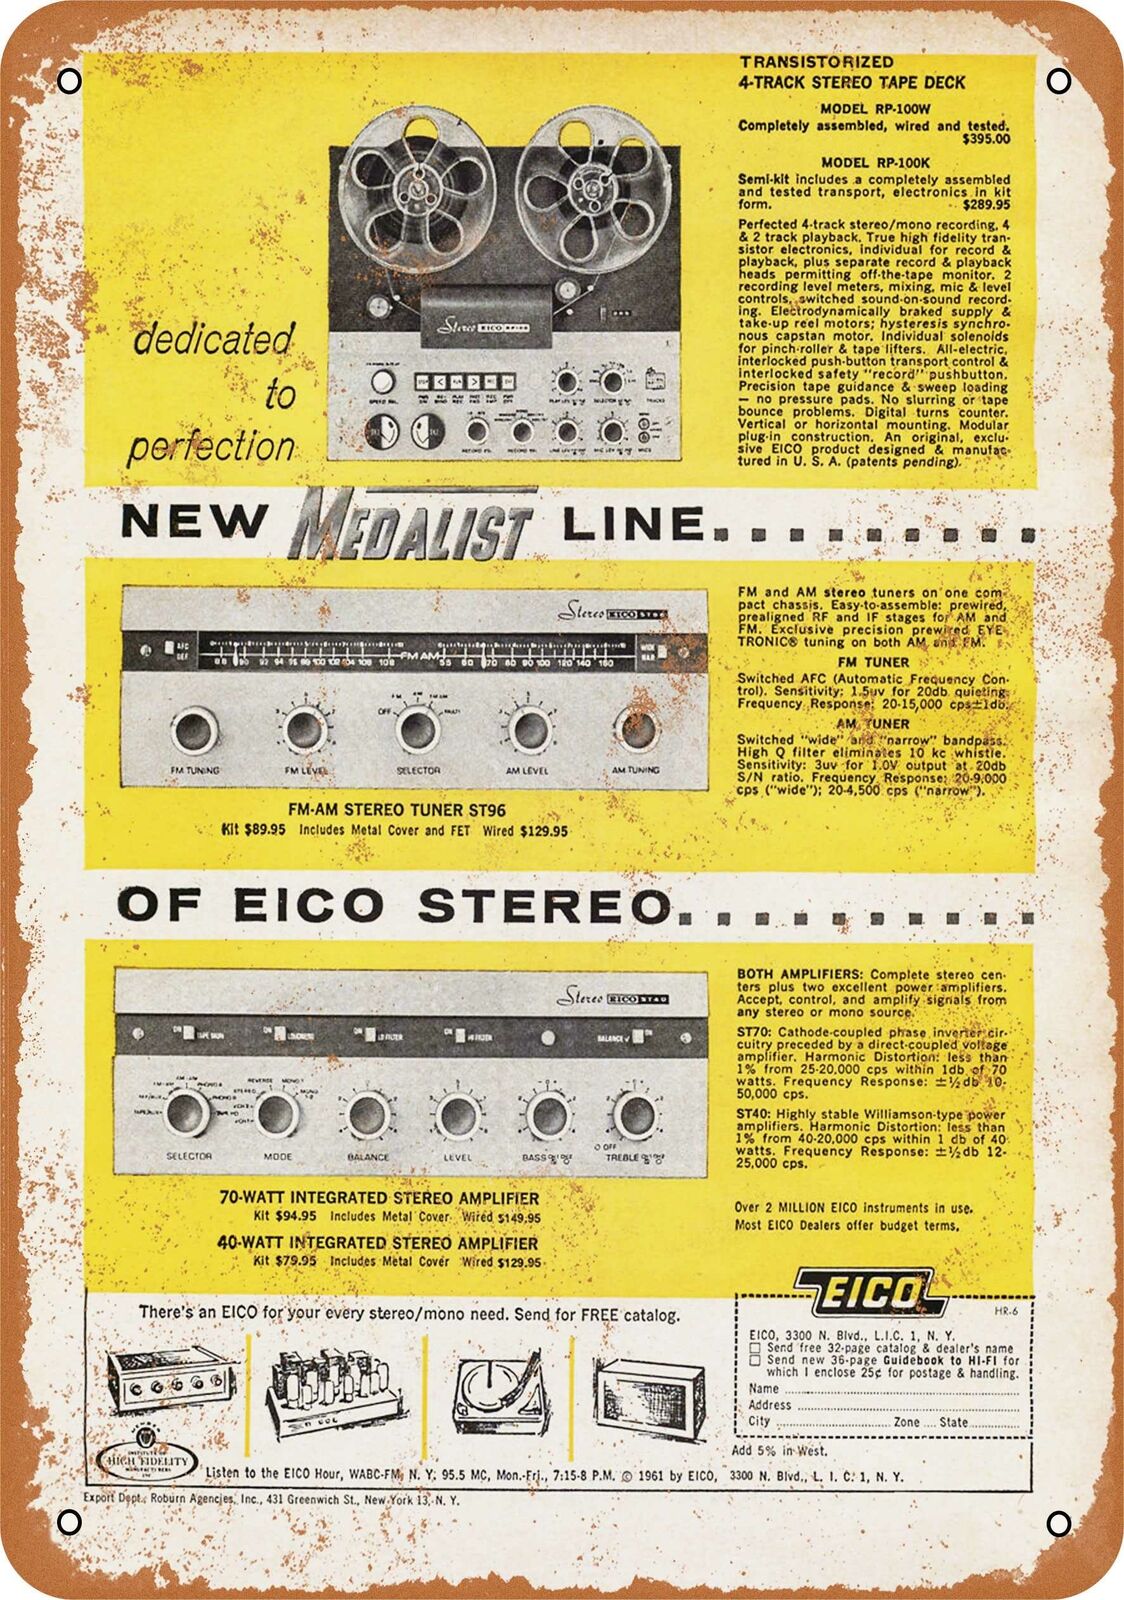 Metal Sign - 1961 Eico Stereo Equipment - Vintage Look Reproduction